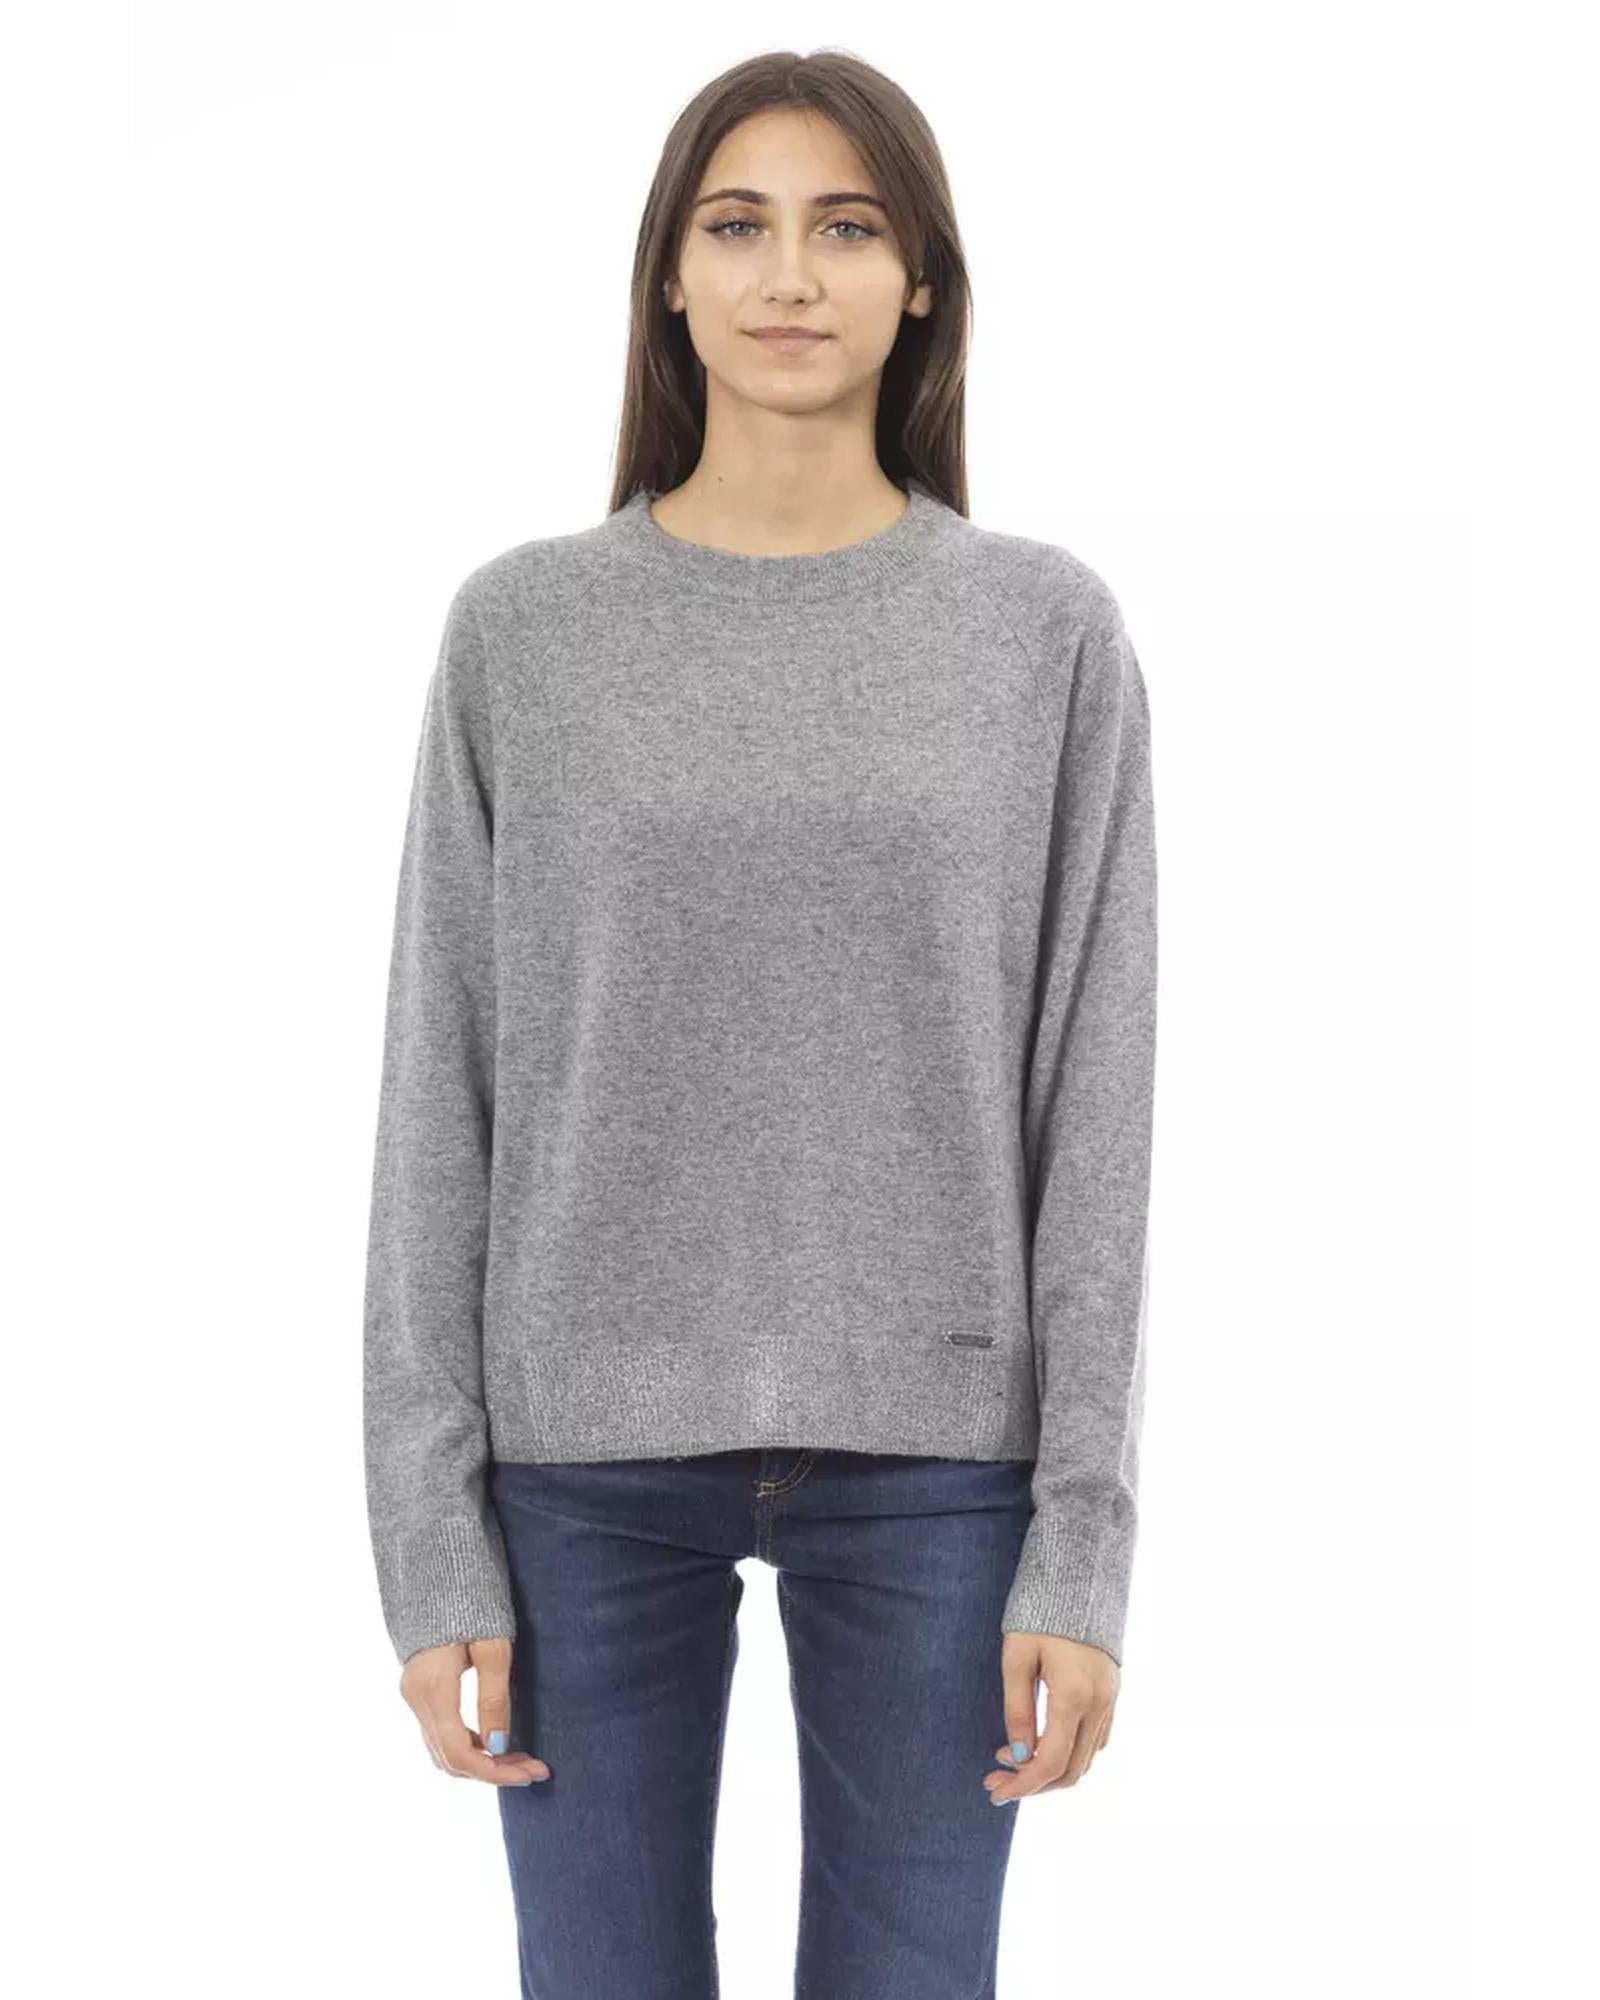 Metal Monogram Crew Neck Sweater with Ribbed Details S Women